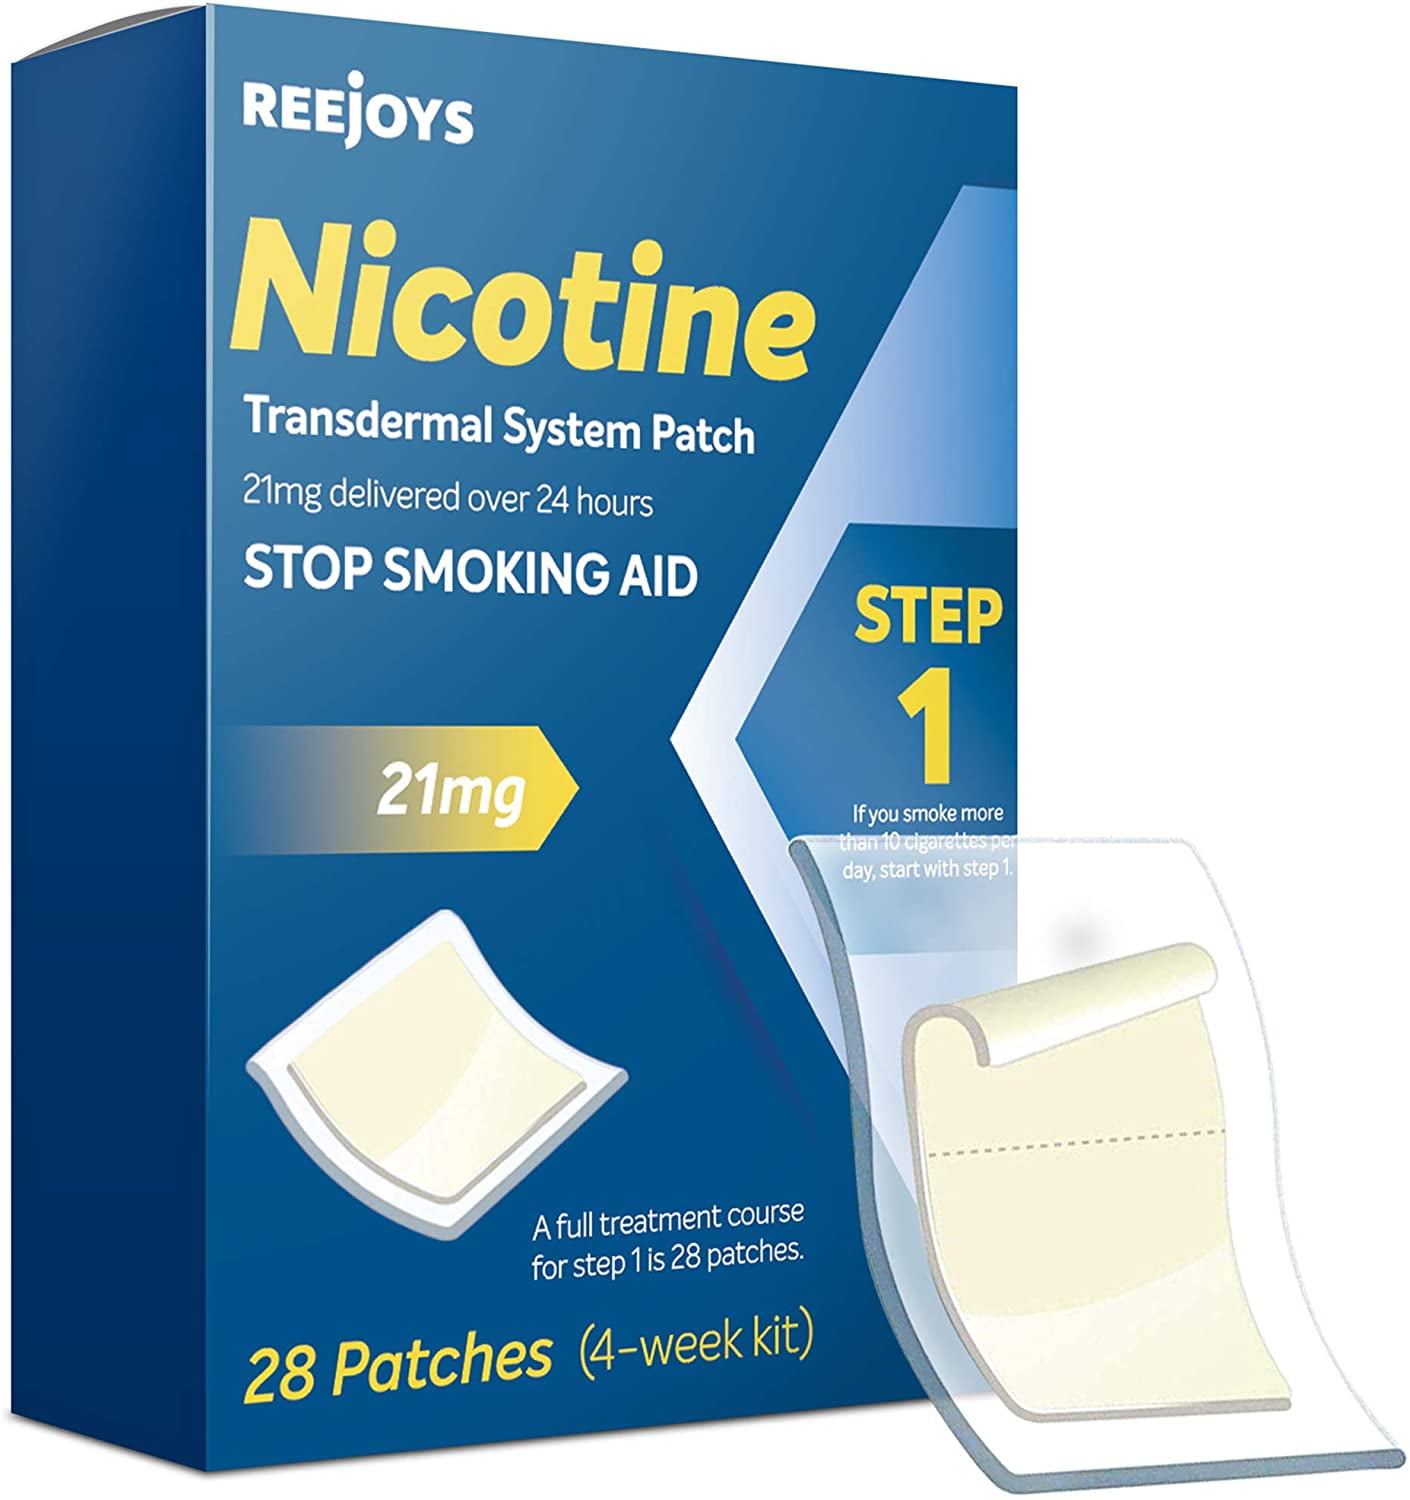 Nicotine Patch: Dosage, How It Works, and Side Effects